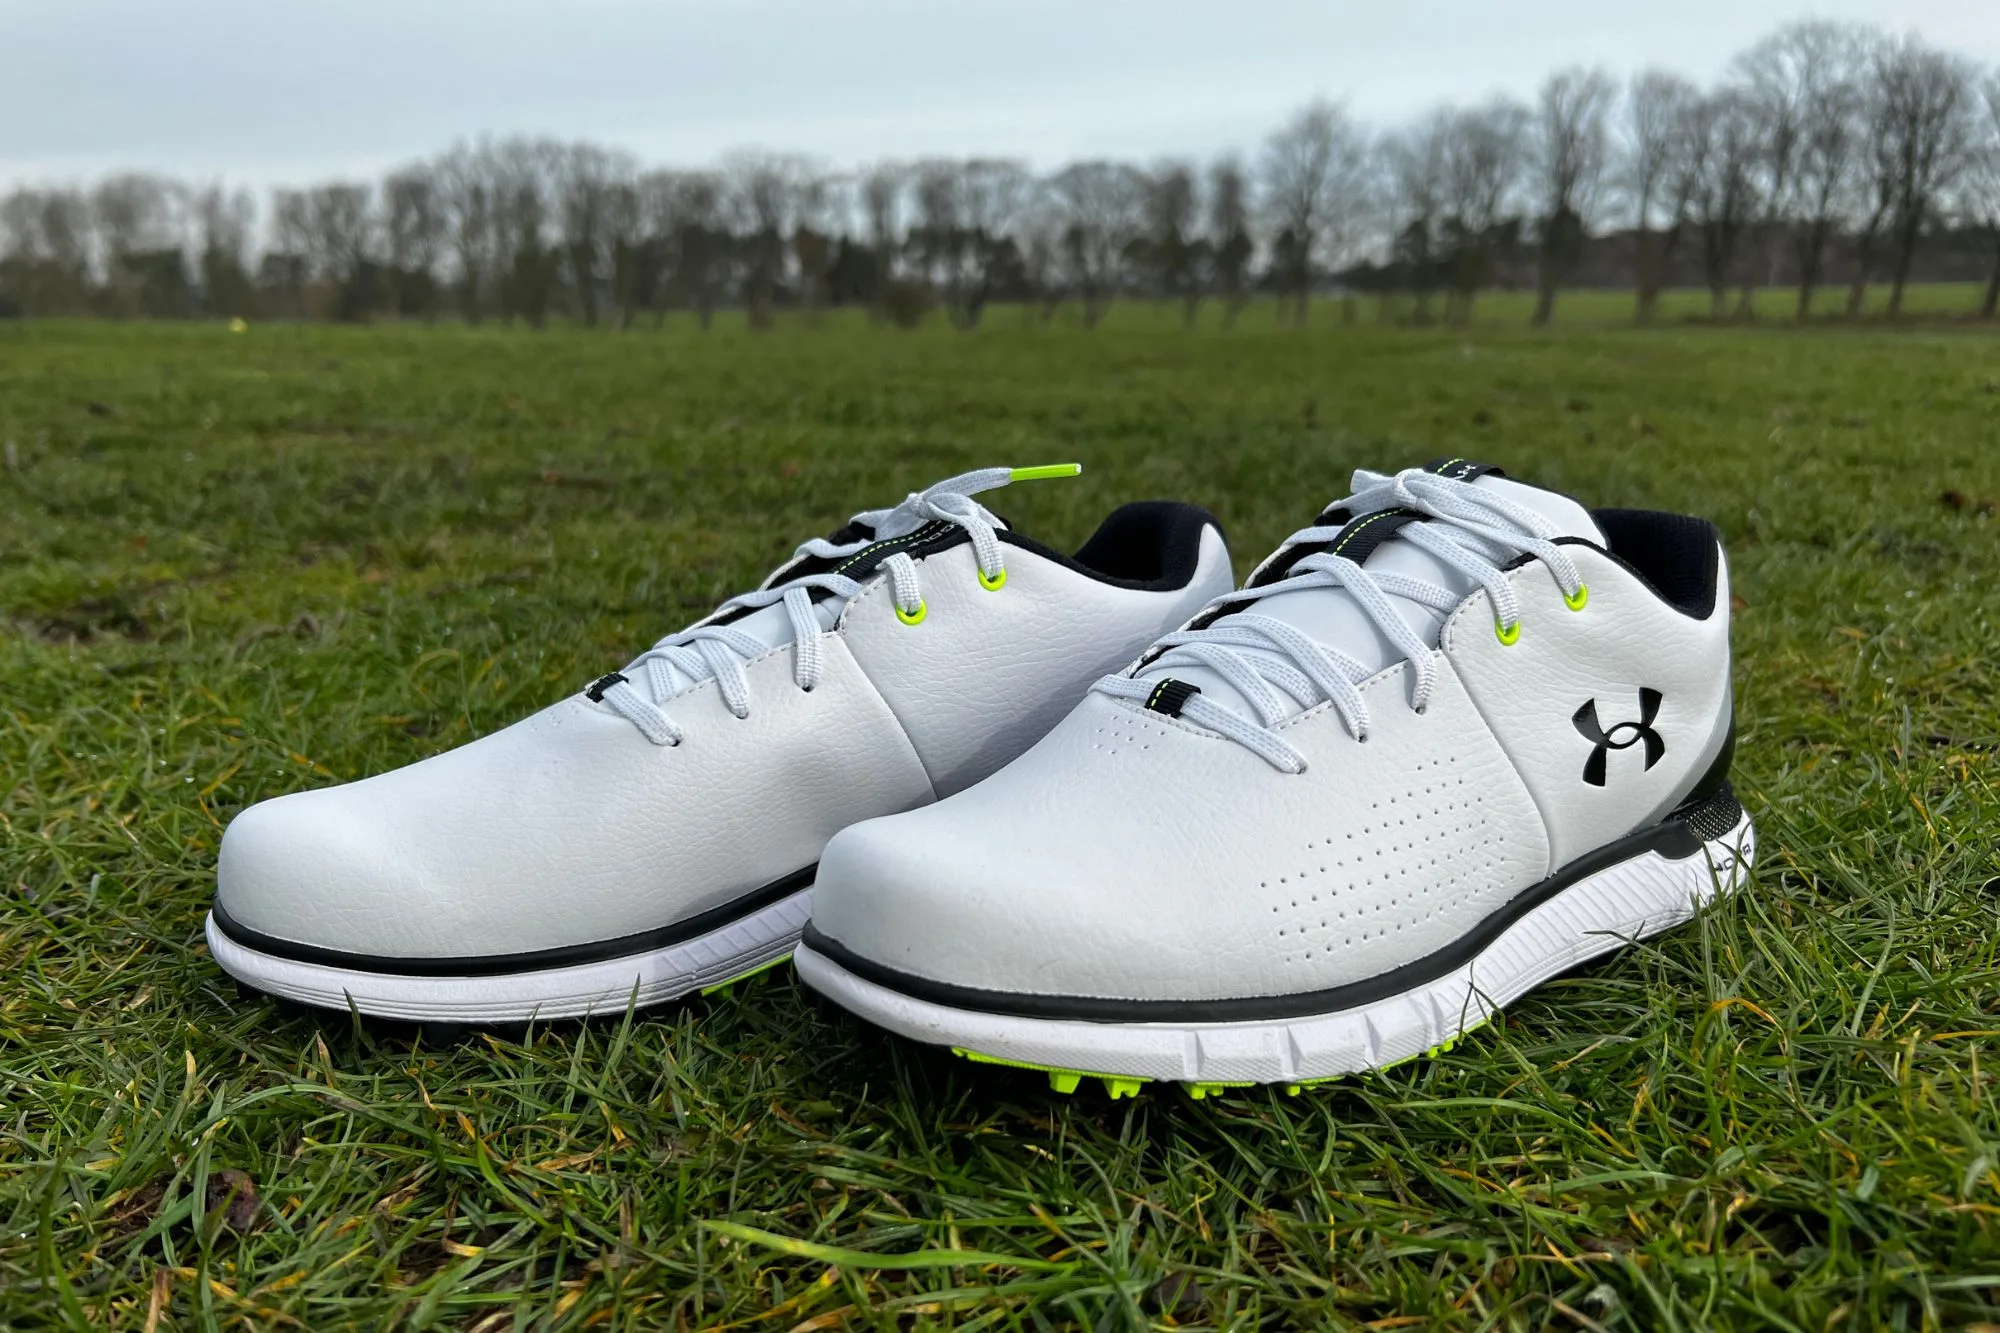 Under Armour Hovr Fade 2 SL golf shoes review